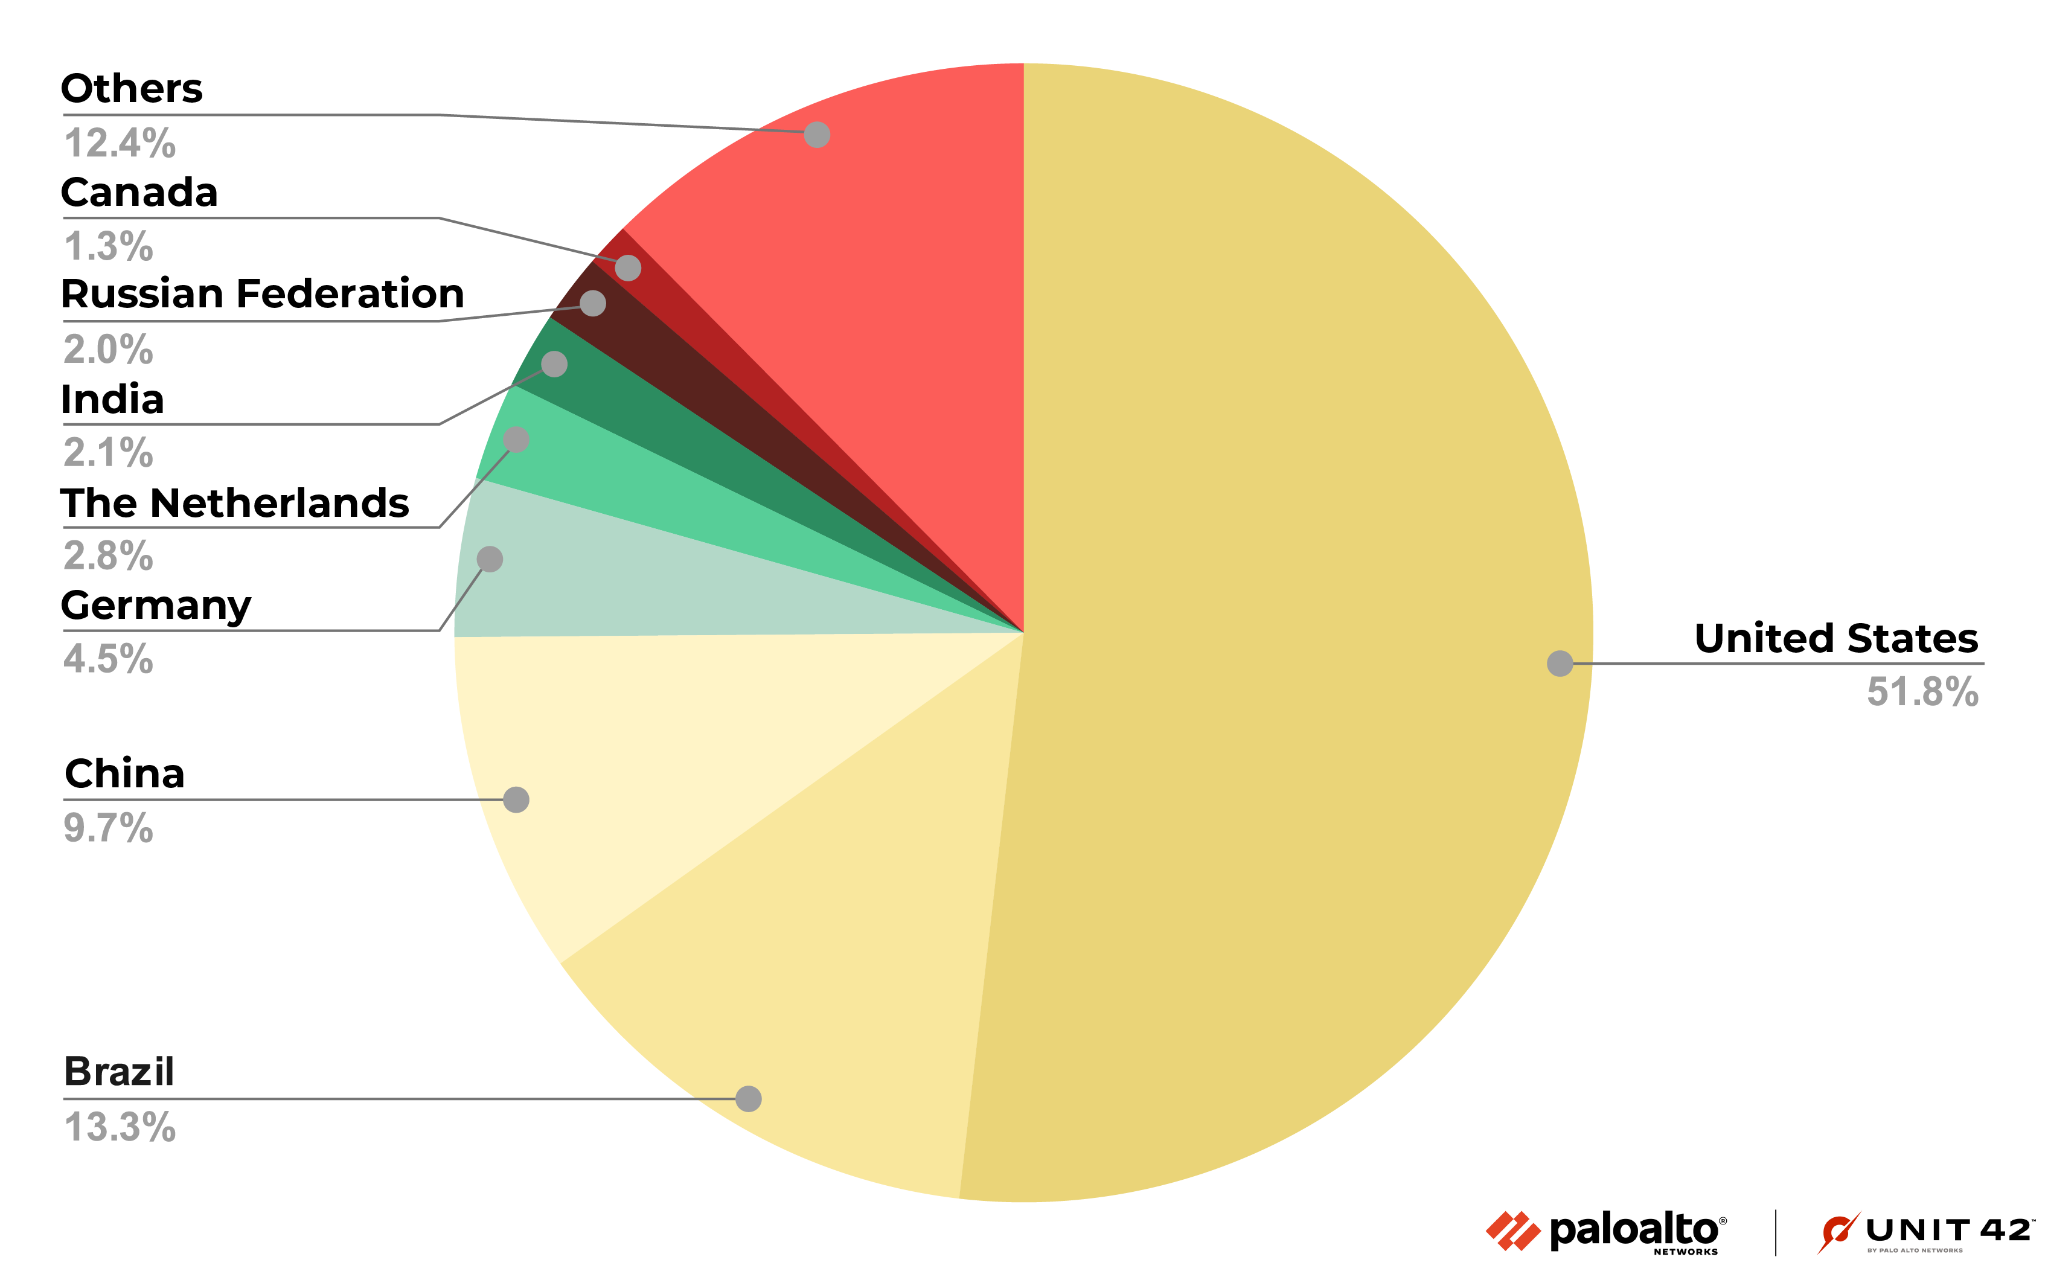 Image 5 is a pie chart of the top eight countries for malicious URLs hosted during July to December 2022. The largest percentage is the United States at 51.8%, followed by Brazil, China, and Germany.